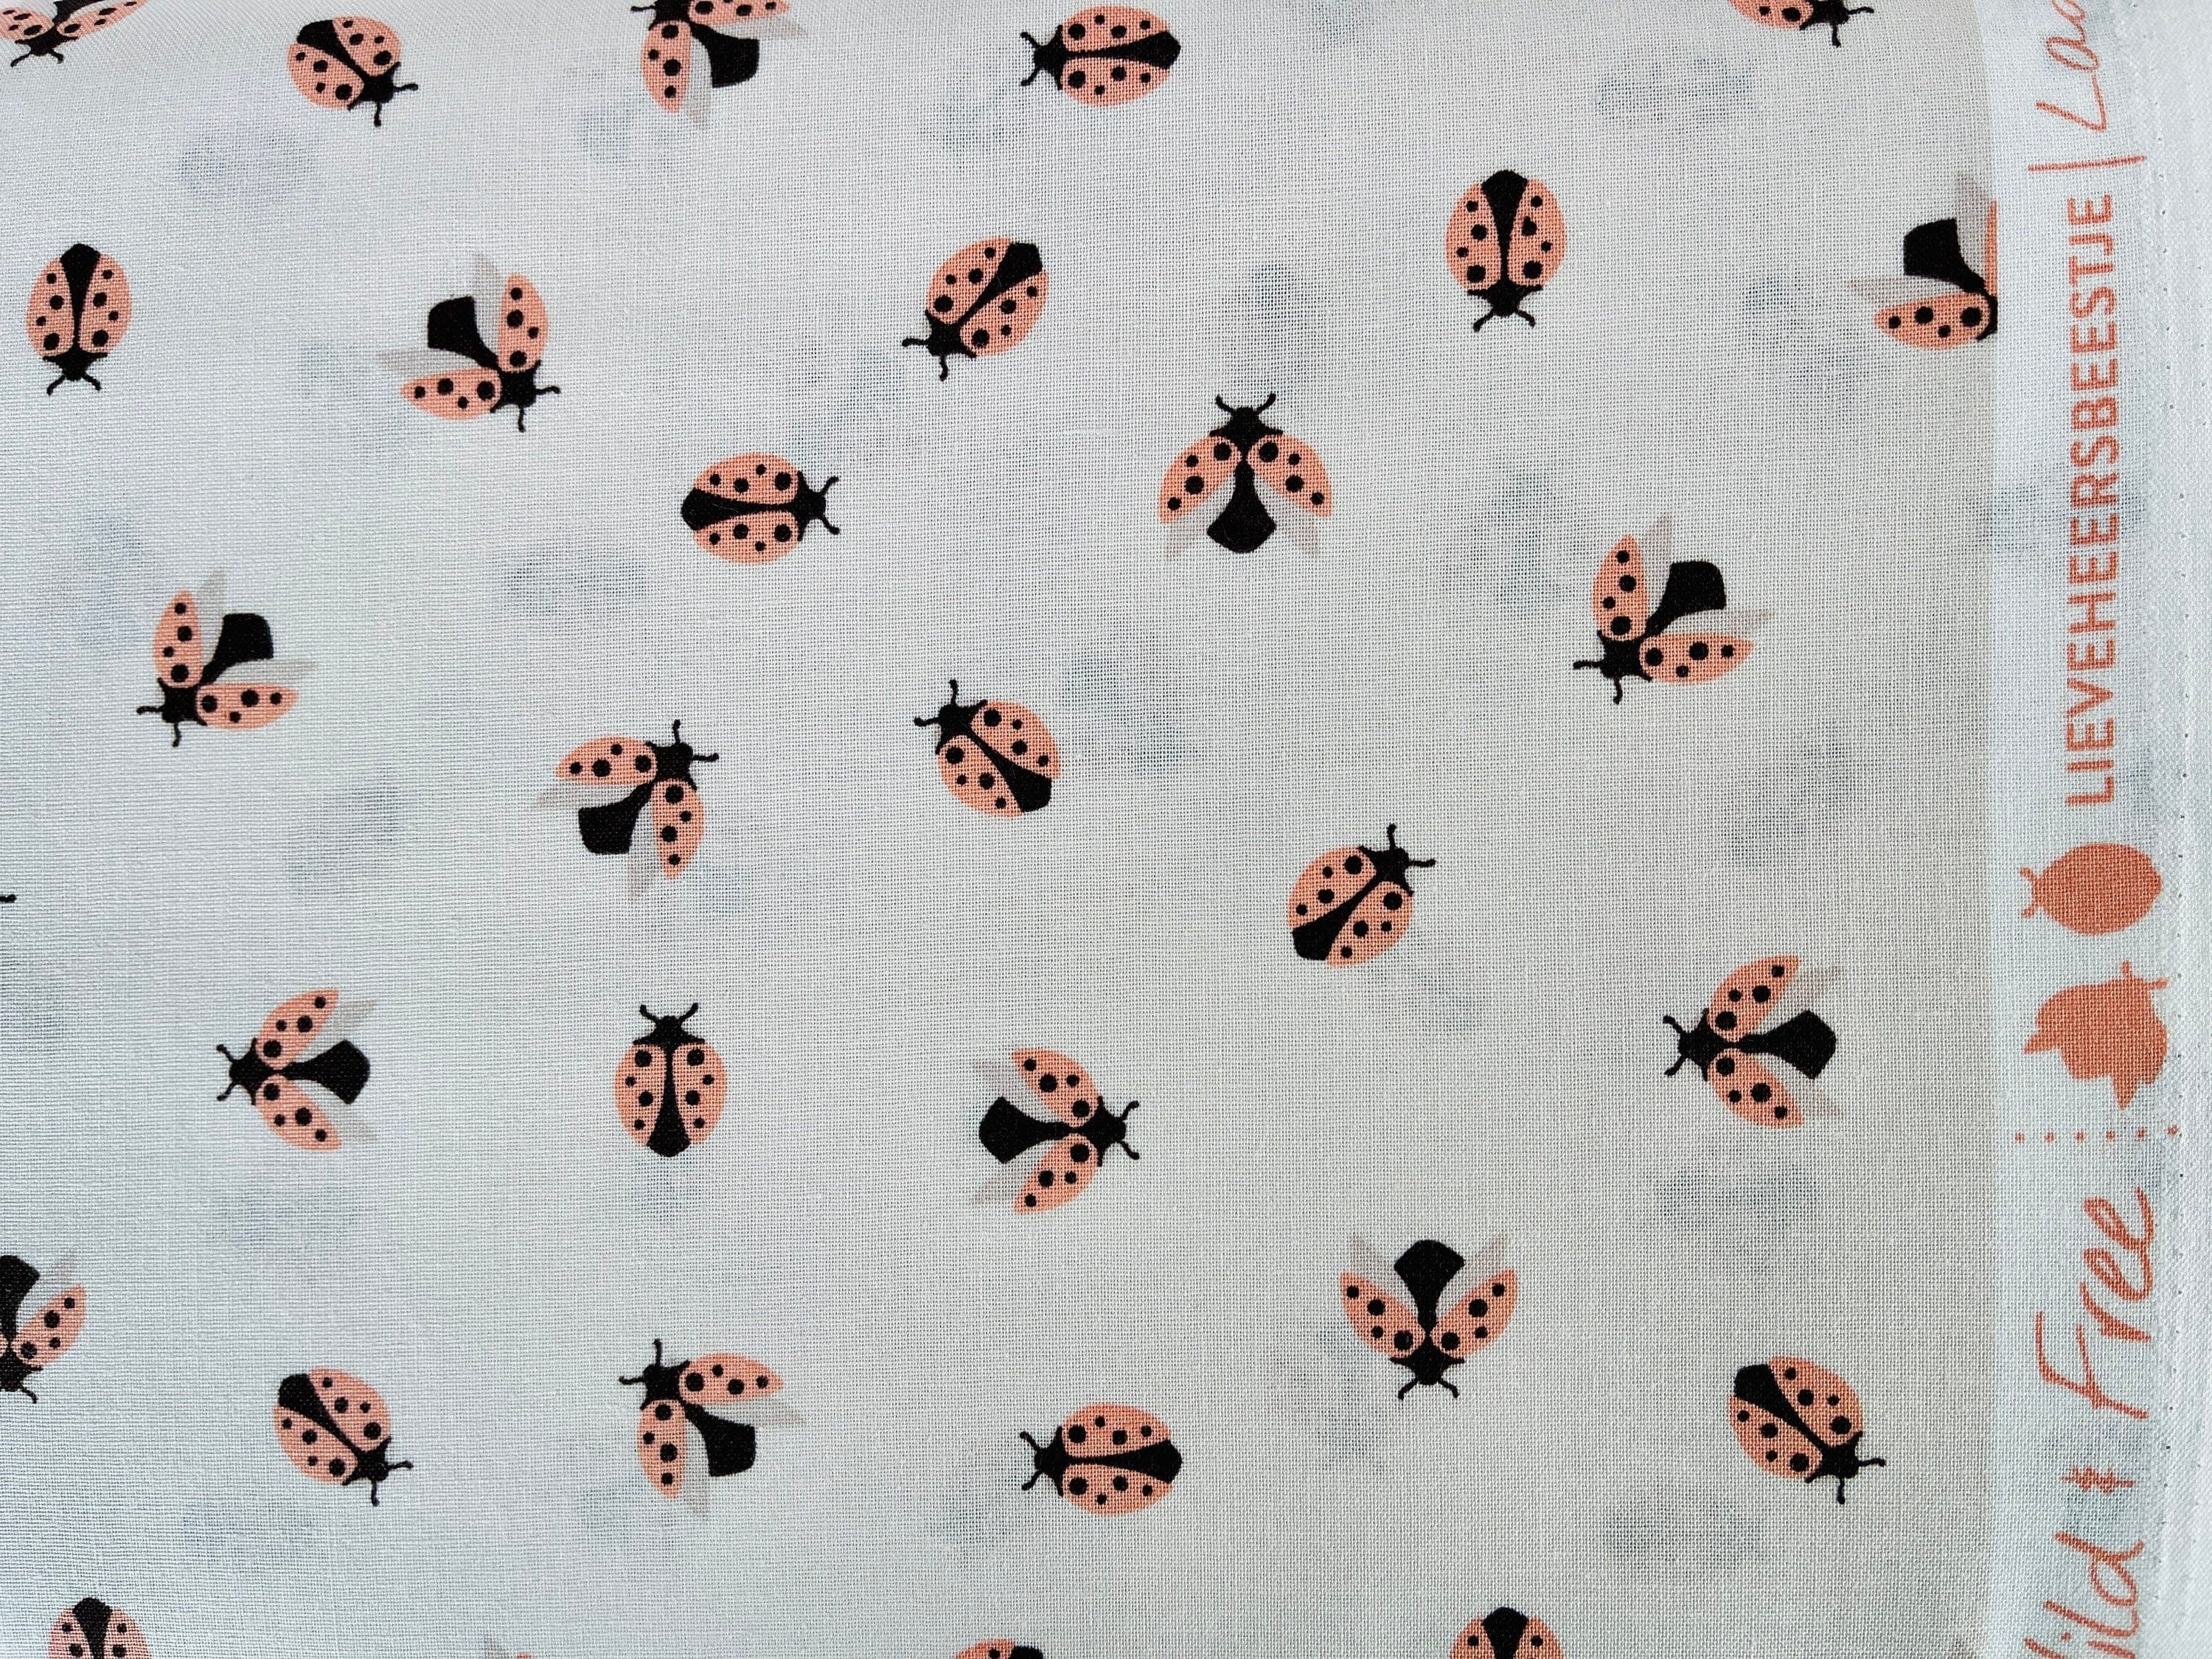 Wild and Free - Ladybug - Summer Vibes Fabric - Loes Van Oosten Cotton + Steel Quilting Cotton - LV602-SV2